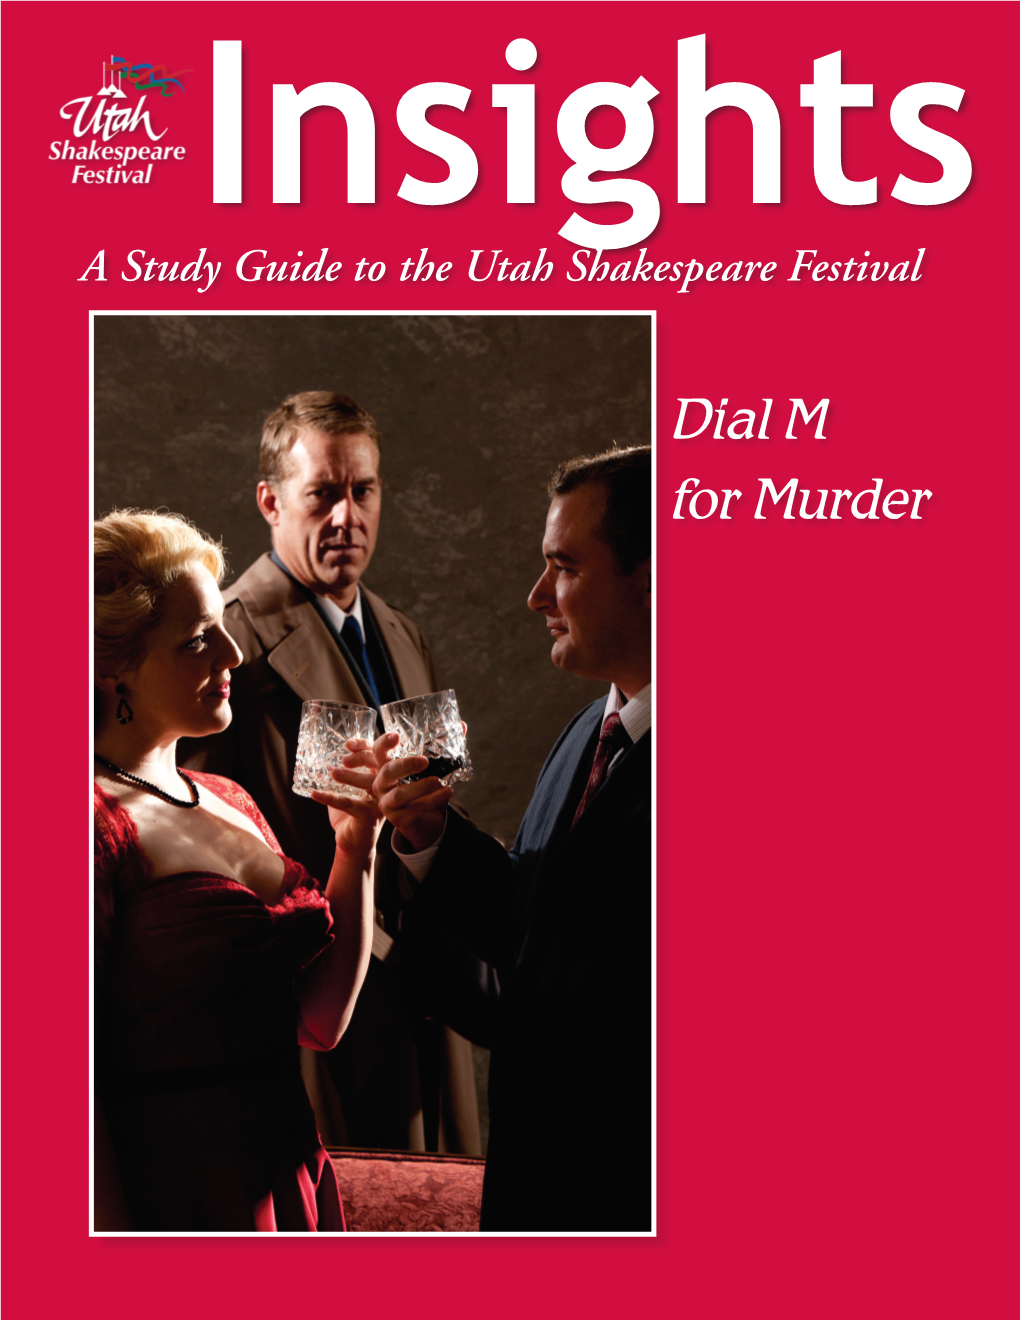 Dial M for Murder the Articles in This Study Guide Are Not Meant to Mirror Or Interpret Any Productions at the Utah Shakespeare Festival